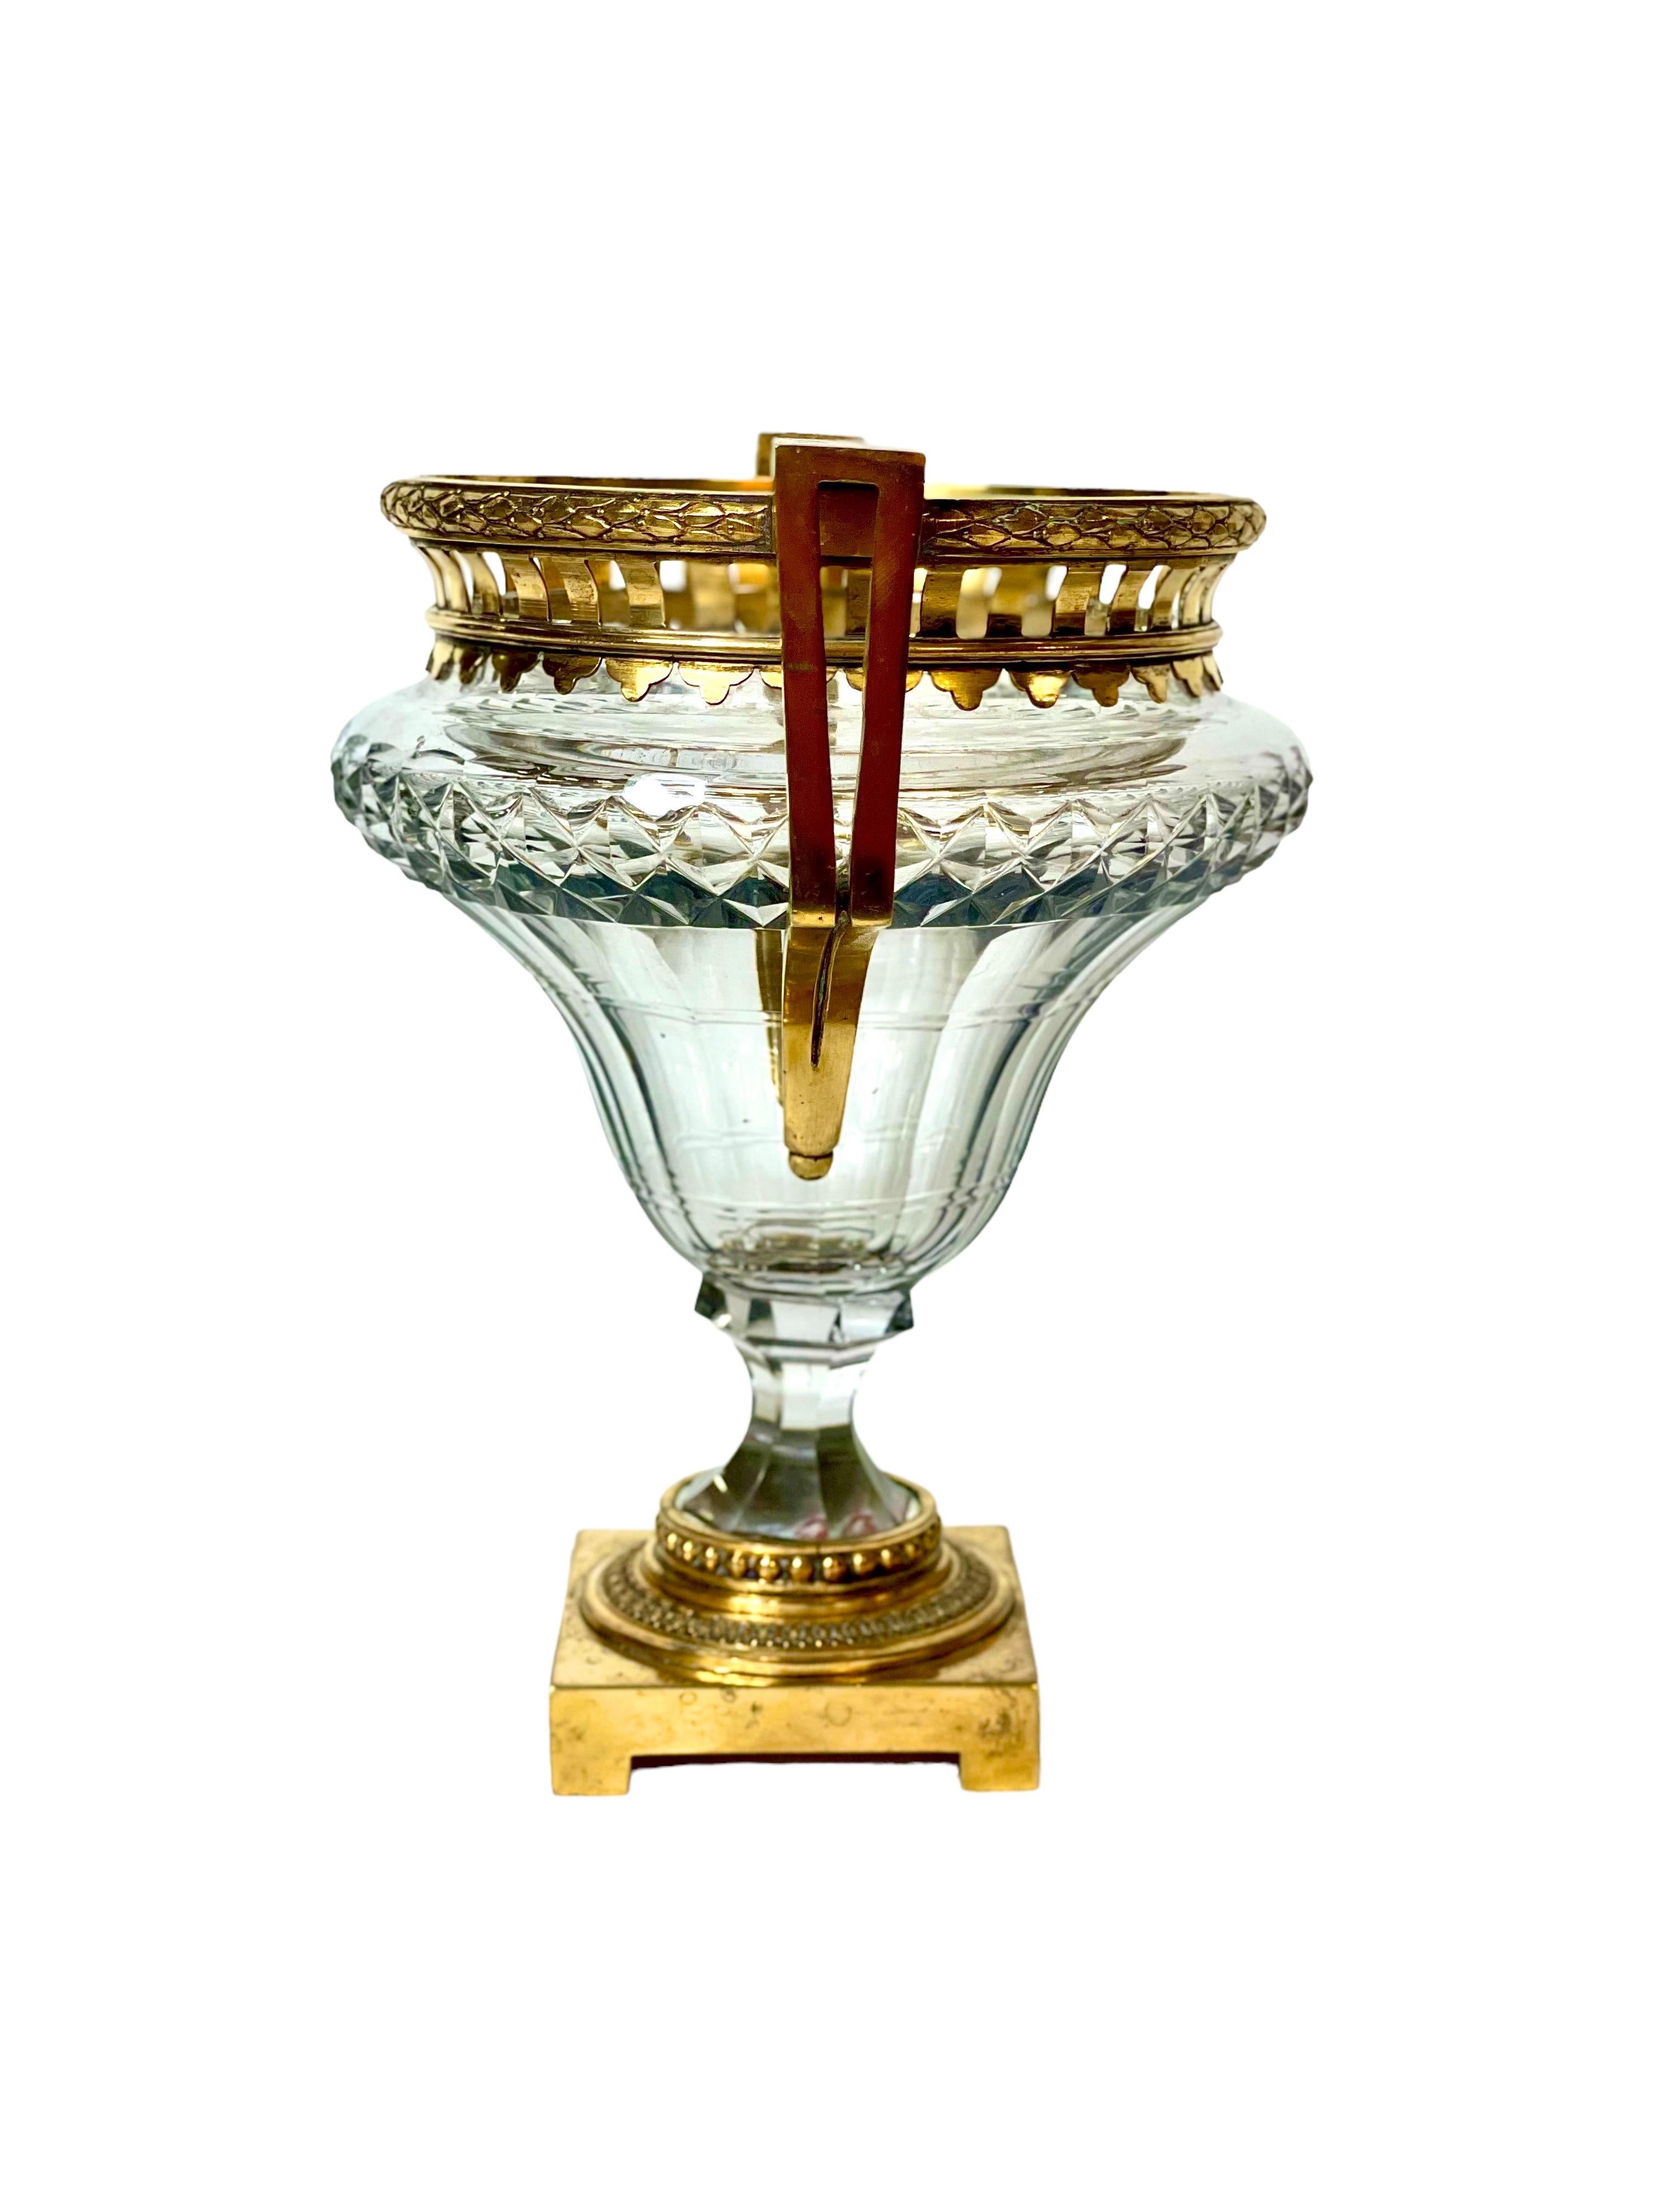 A classic and opulent crystal and gilt bronze Louis XVI-style vase, its goblet-shaped heavy crystal bowl diamond cut and fluted to refract the light. Luxuriously embellished with a brass frame and striking, square-cornered handles, the rim and